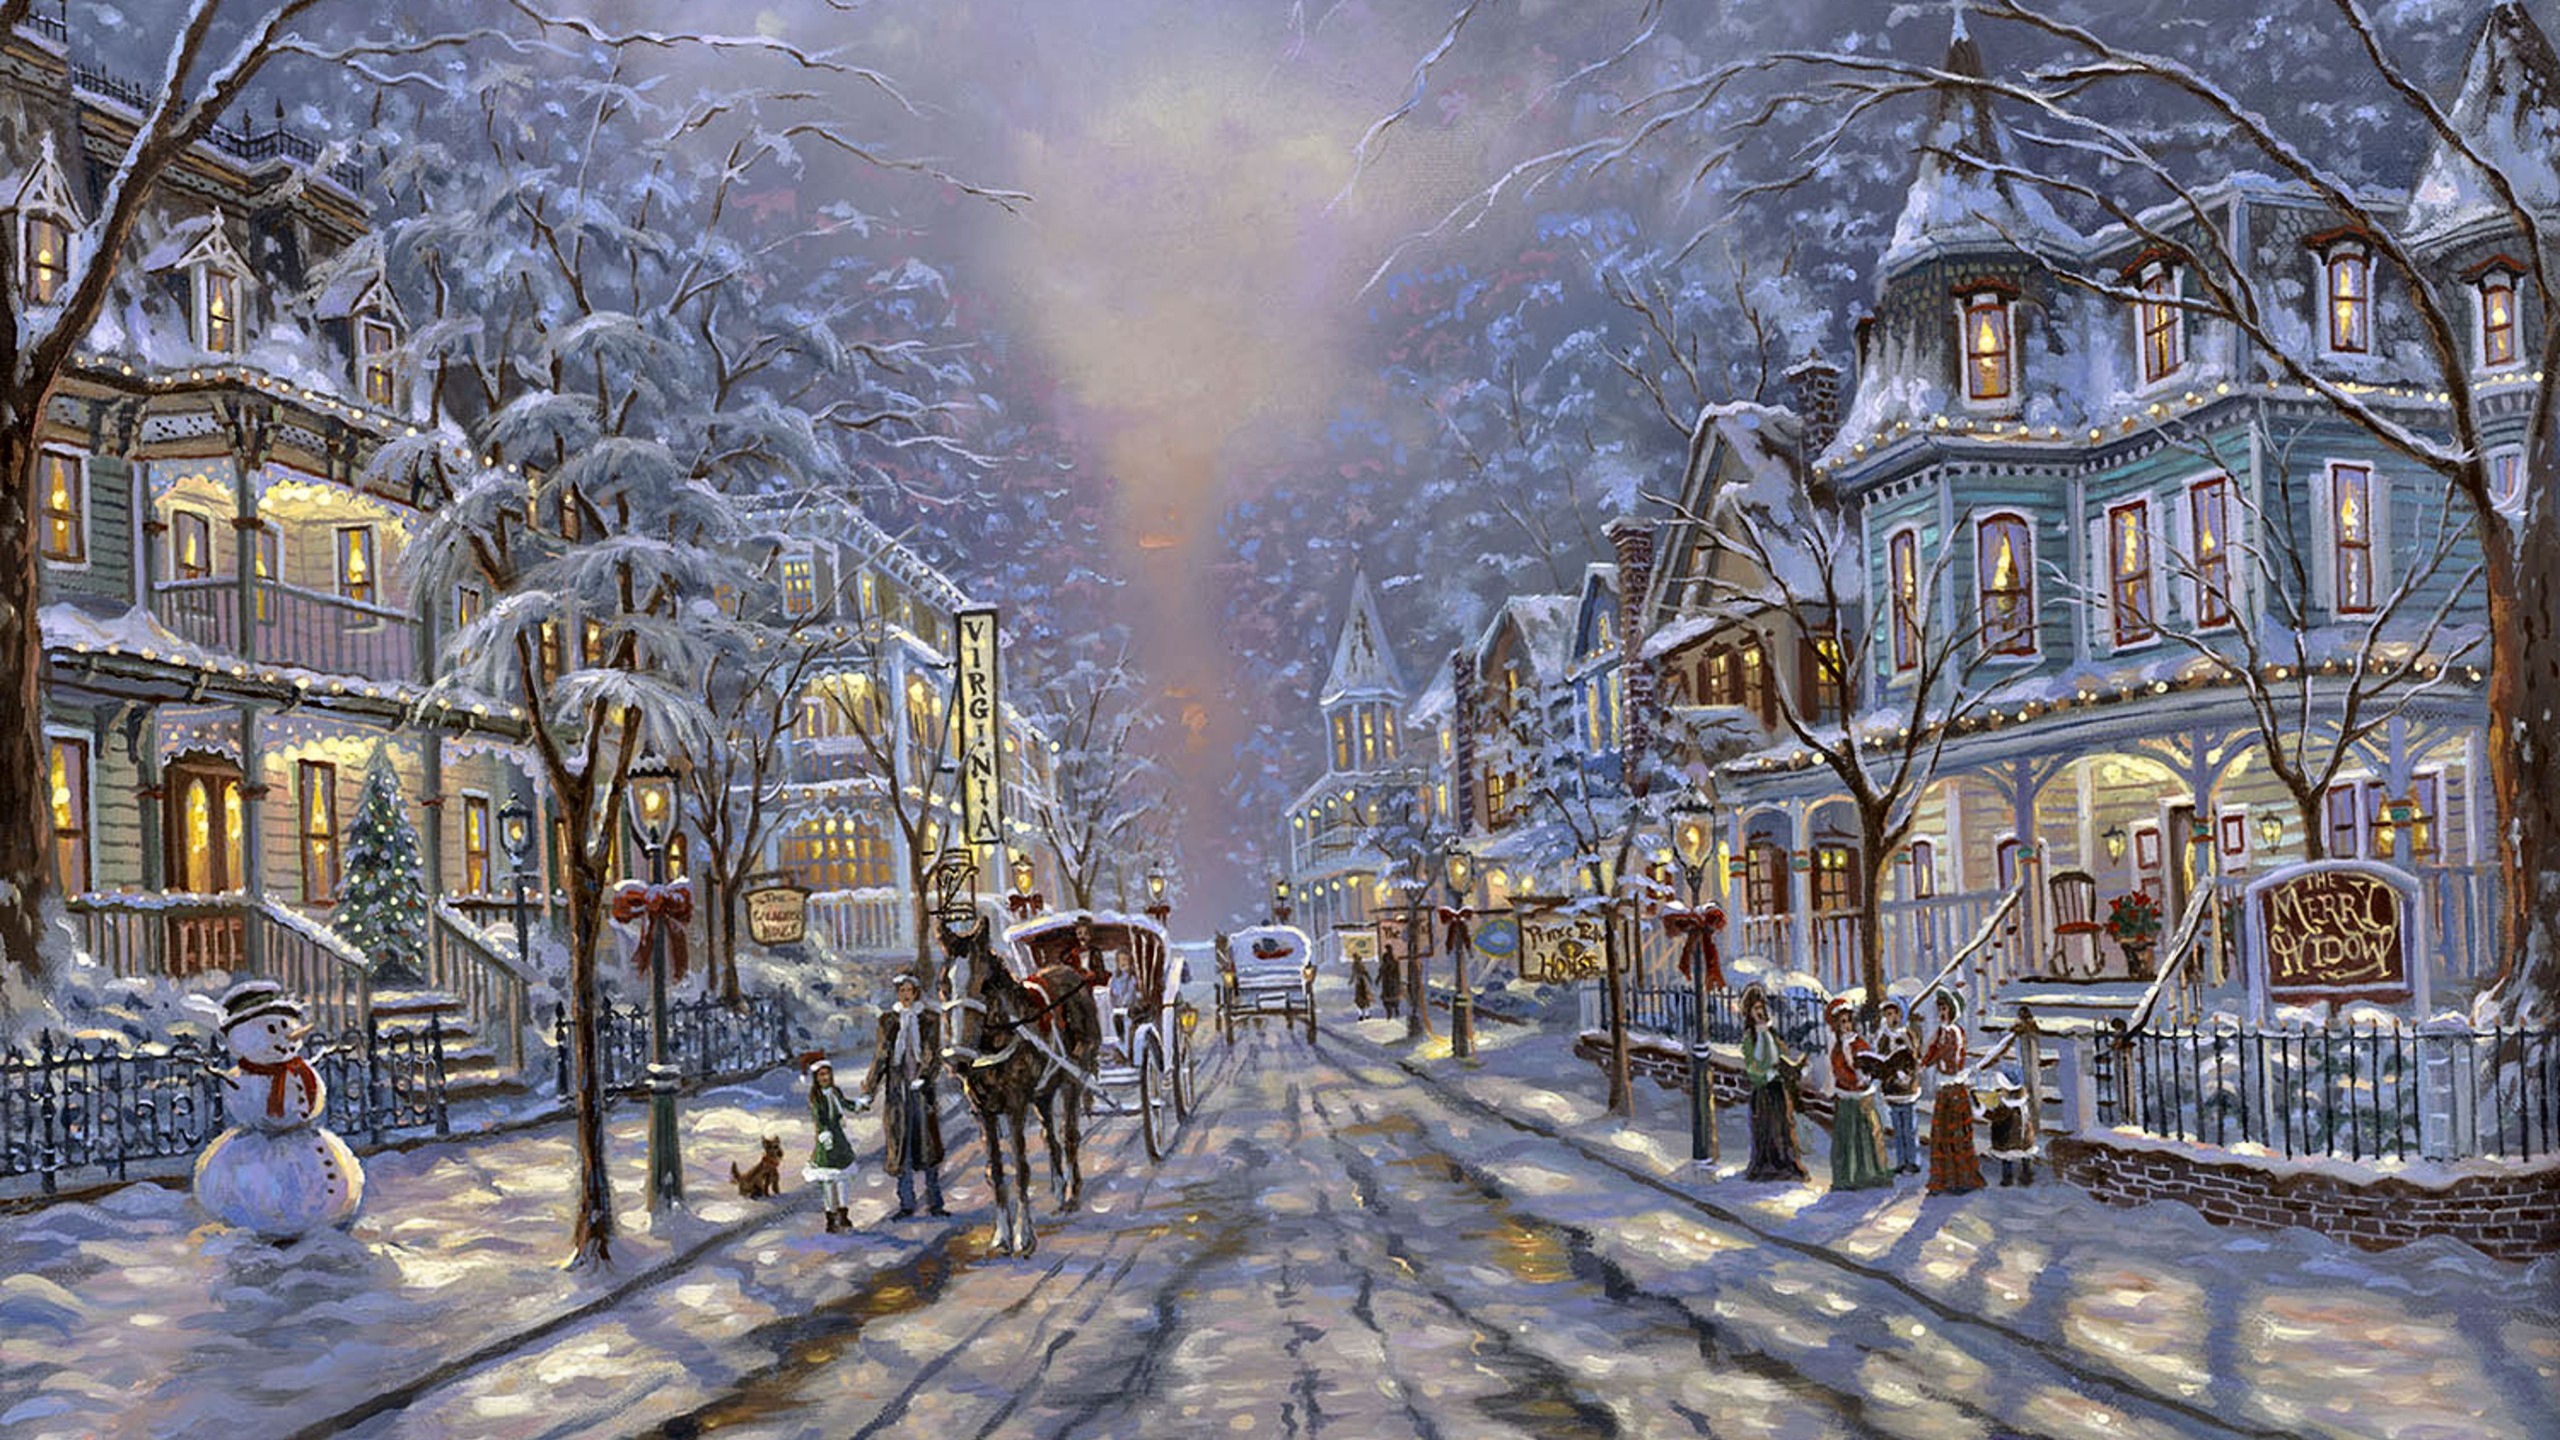 2560x1440 Christmas Scene December Painting Scenery Snow Holiday Illustration Art  Artwork Wide Screen Occasion Wallpaper - 